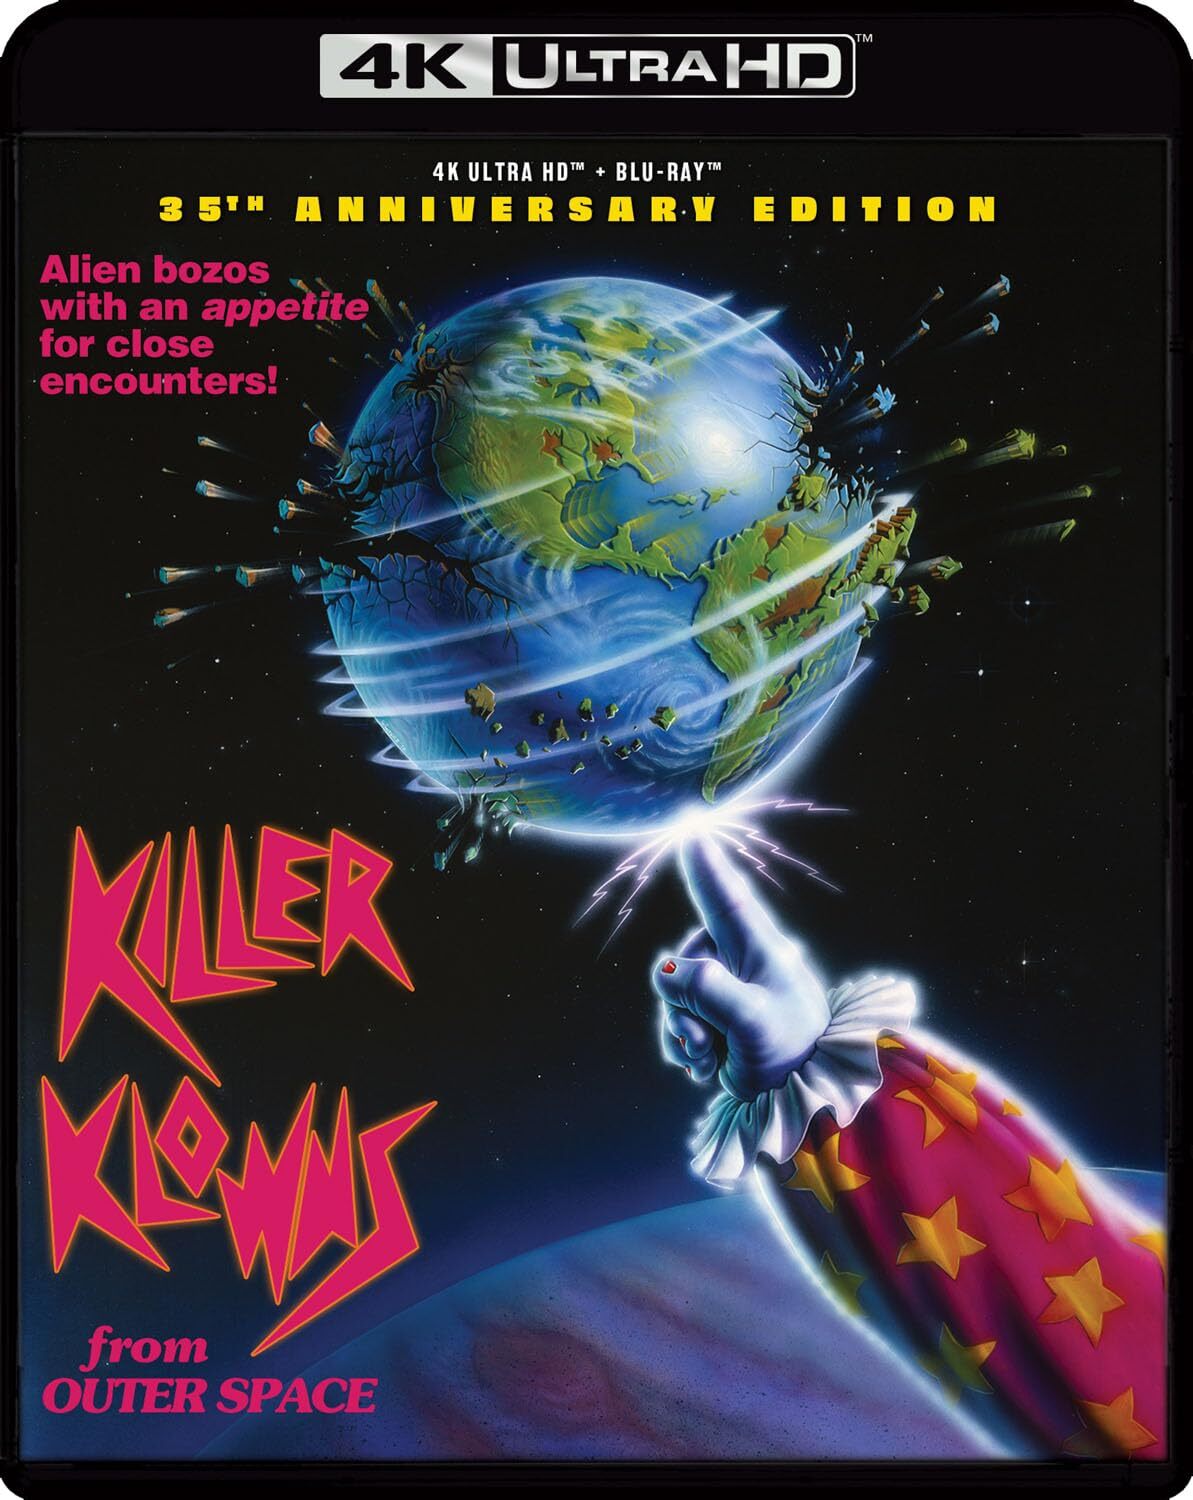 KILLER KLOWNS FROM OUTER SPACE 4K UHD/BLU-RAY